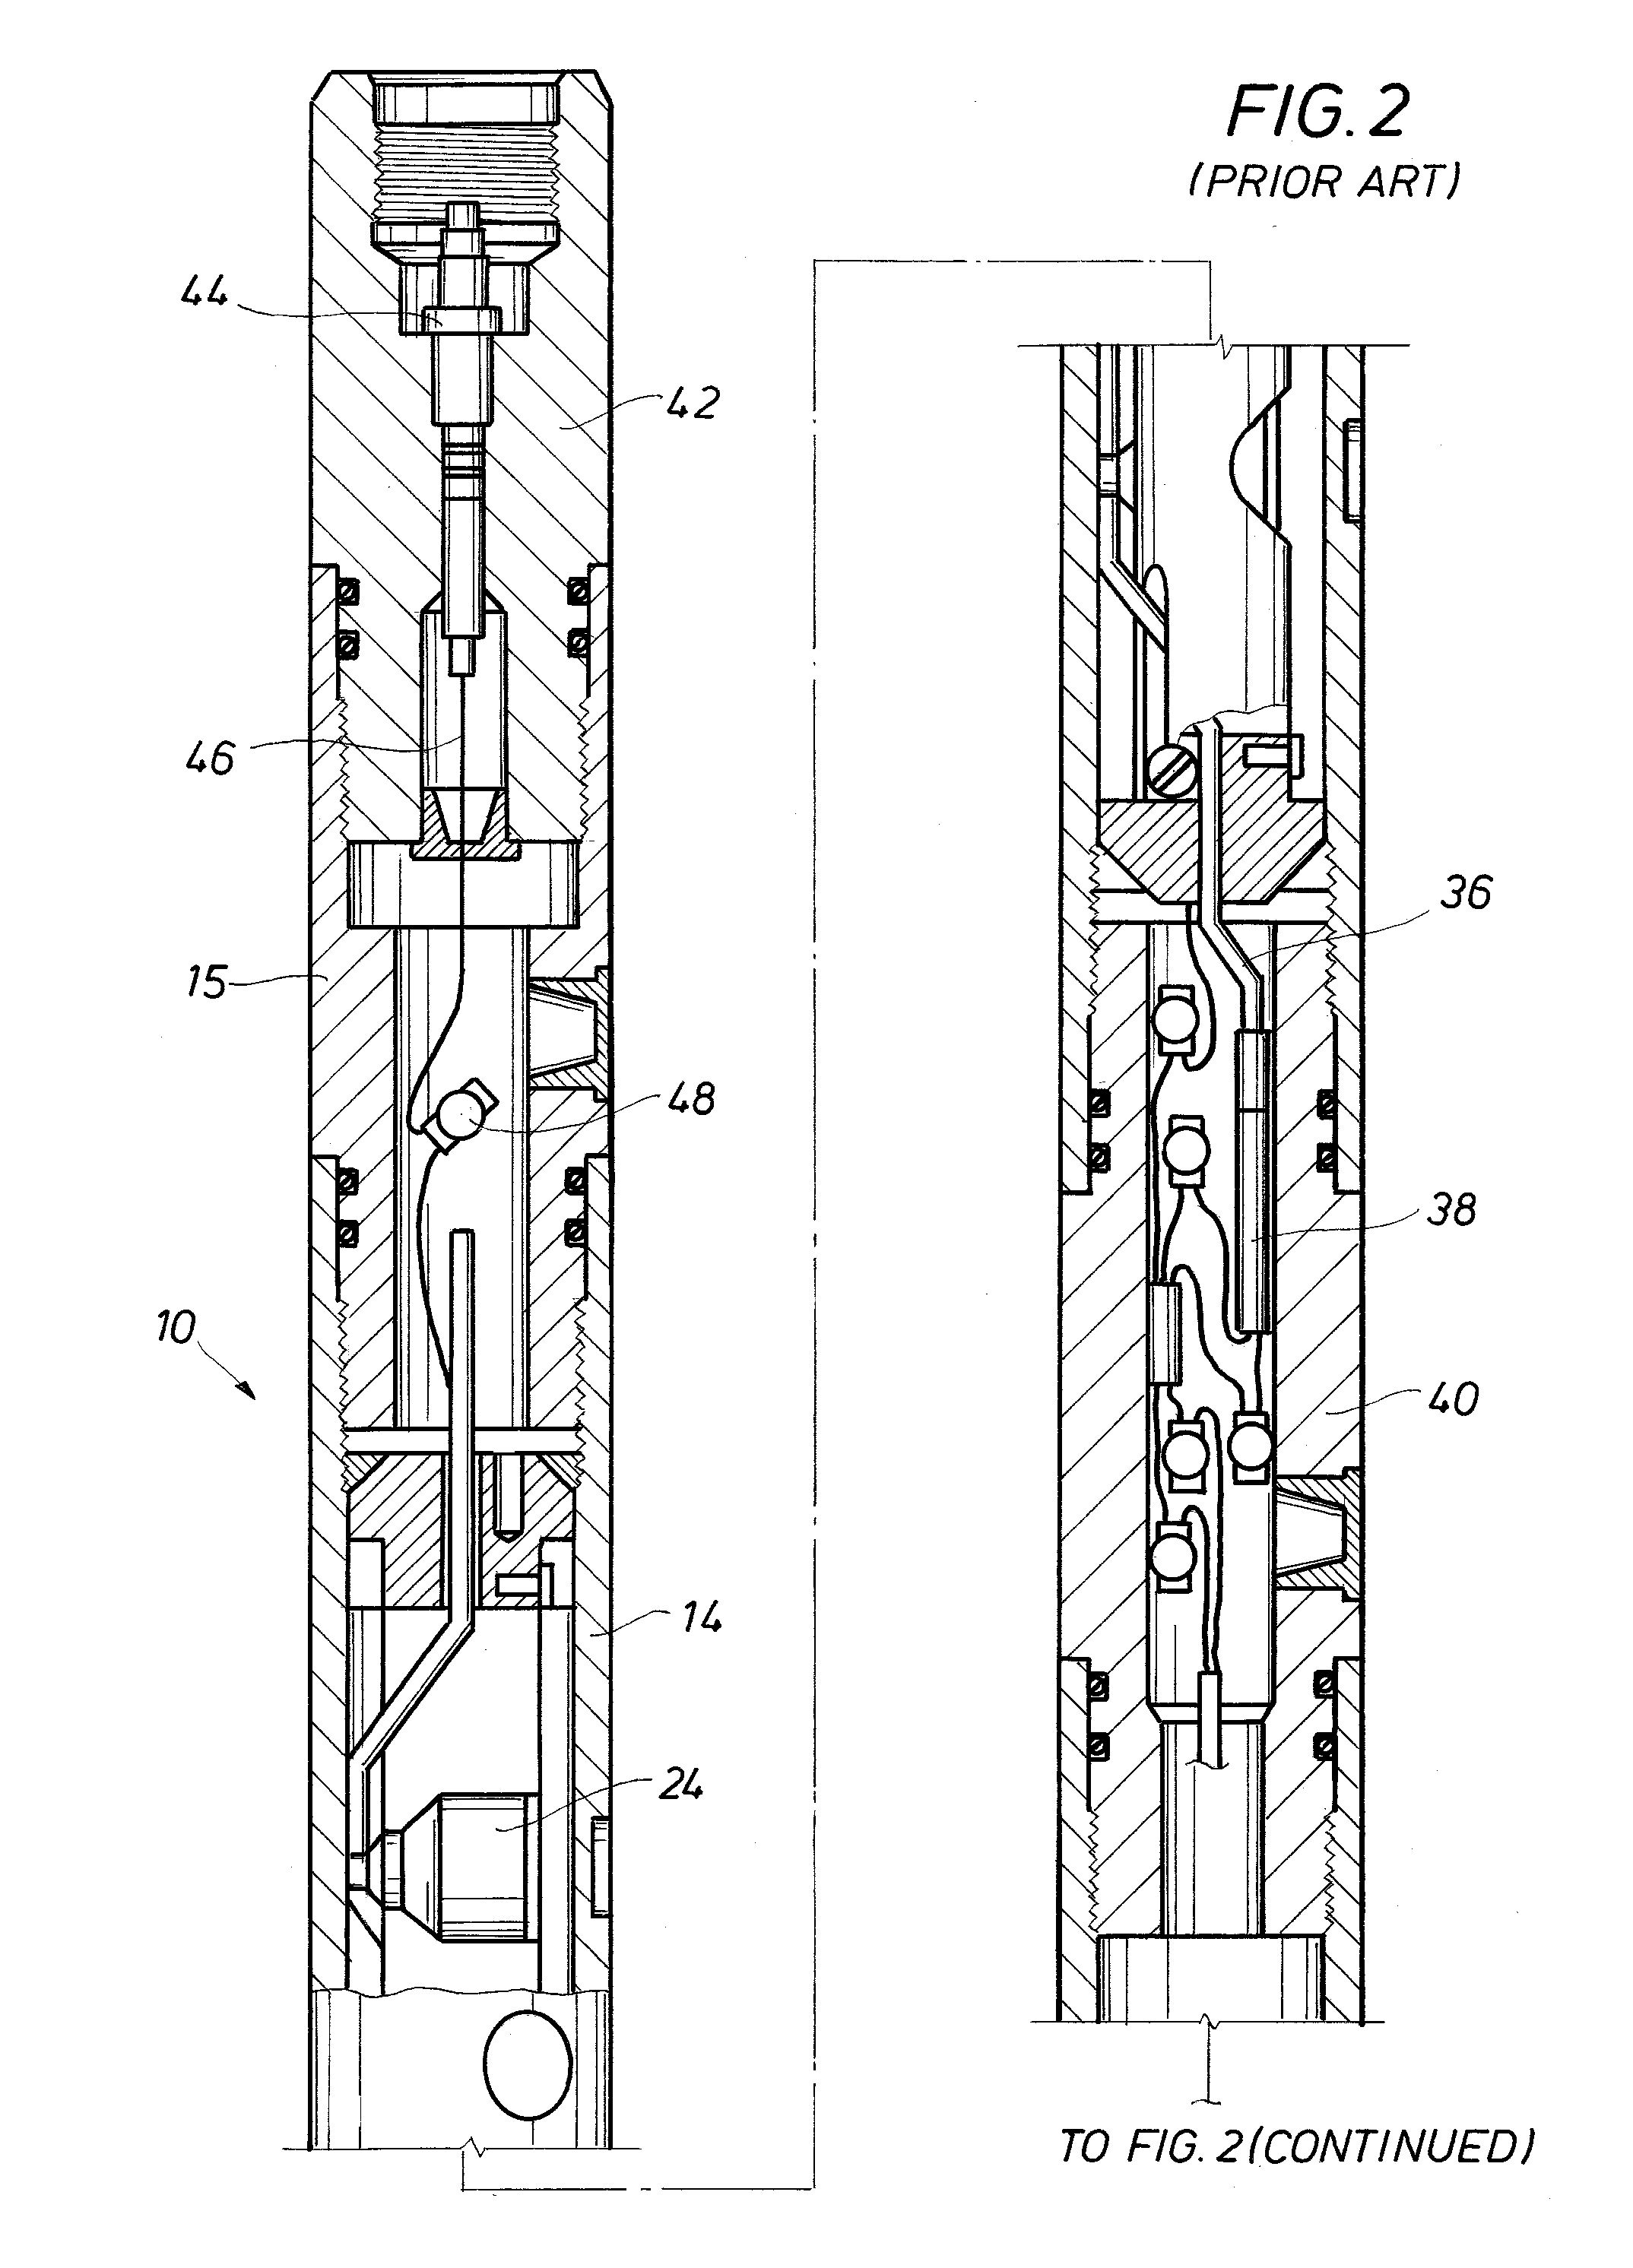 Connection cartridge for downhole string